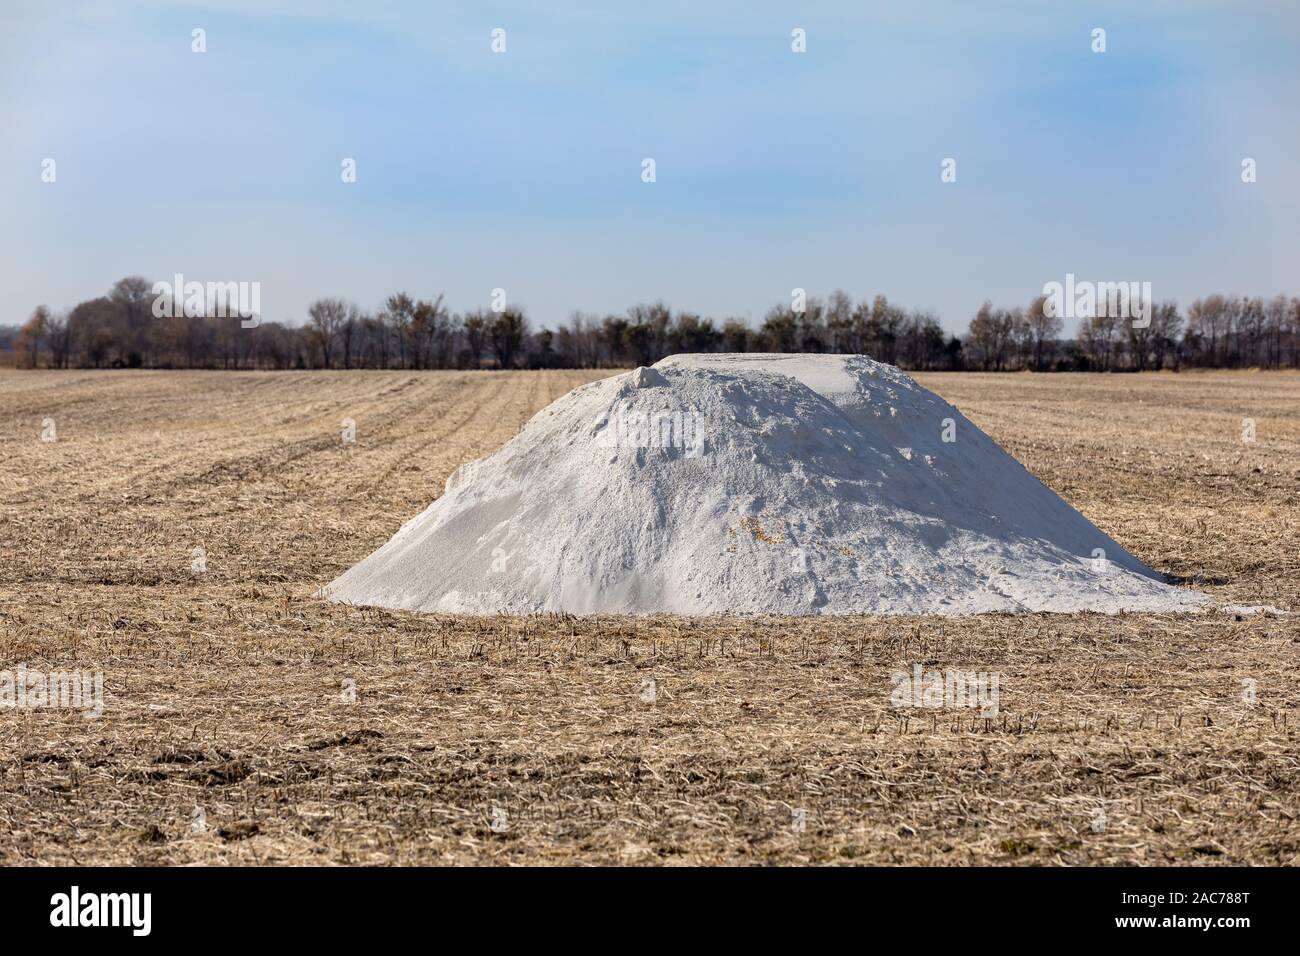 Pile of pulverized agriculture lime, limestone, fertilizer in soybean farm field stubble waiting for fall application Stock Photo